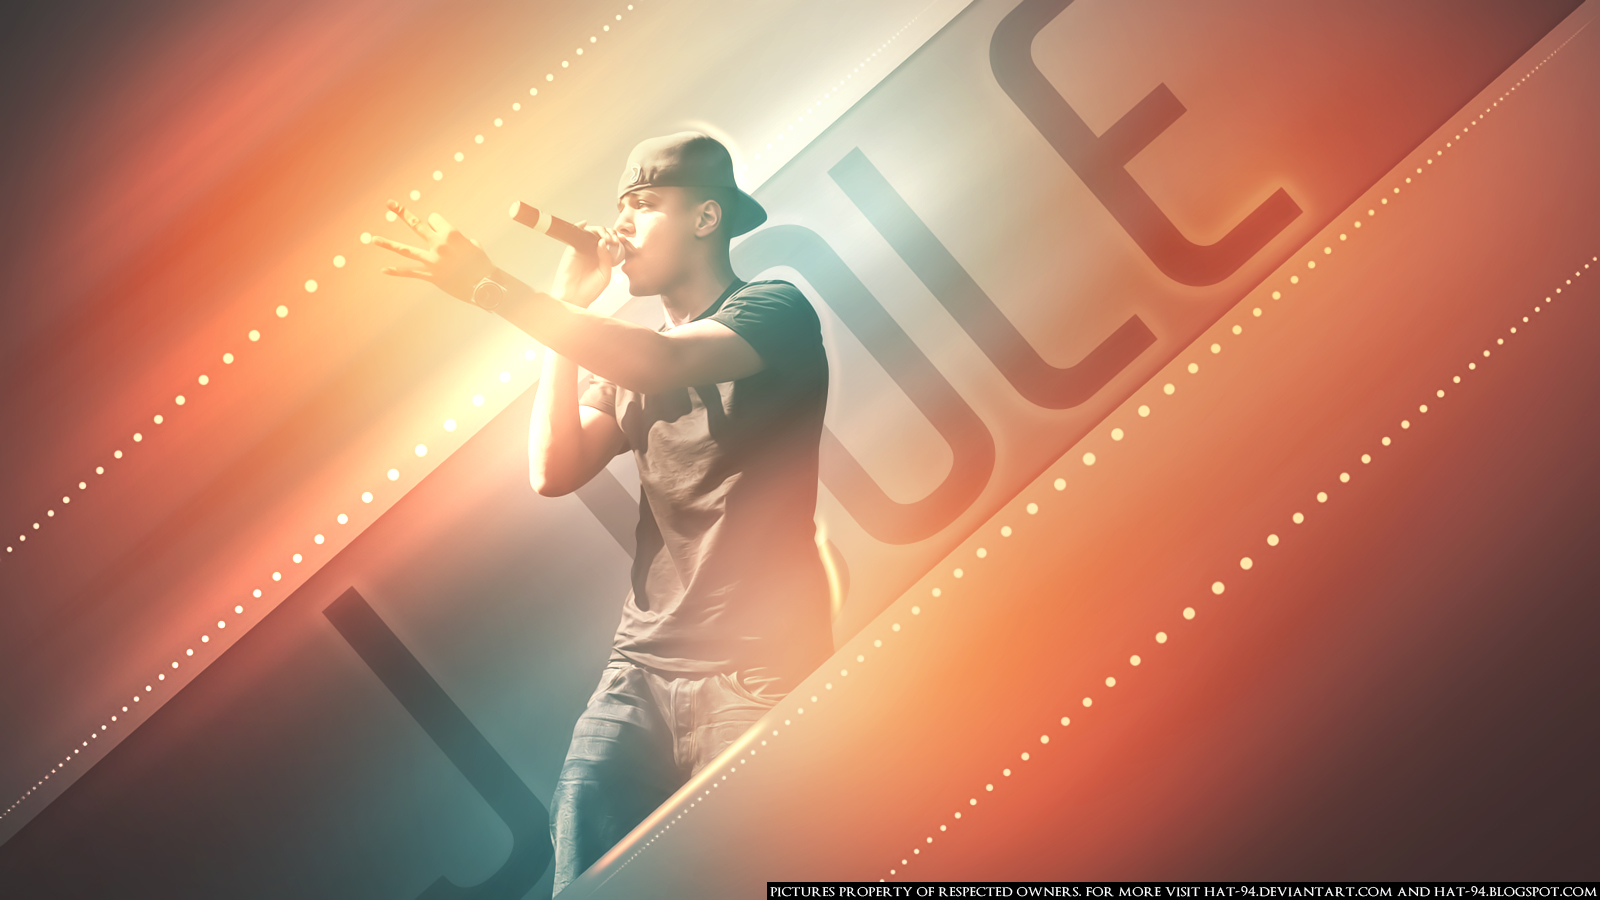 cole wallpaper 3 by hat 94 customization wallpaper people males